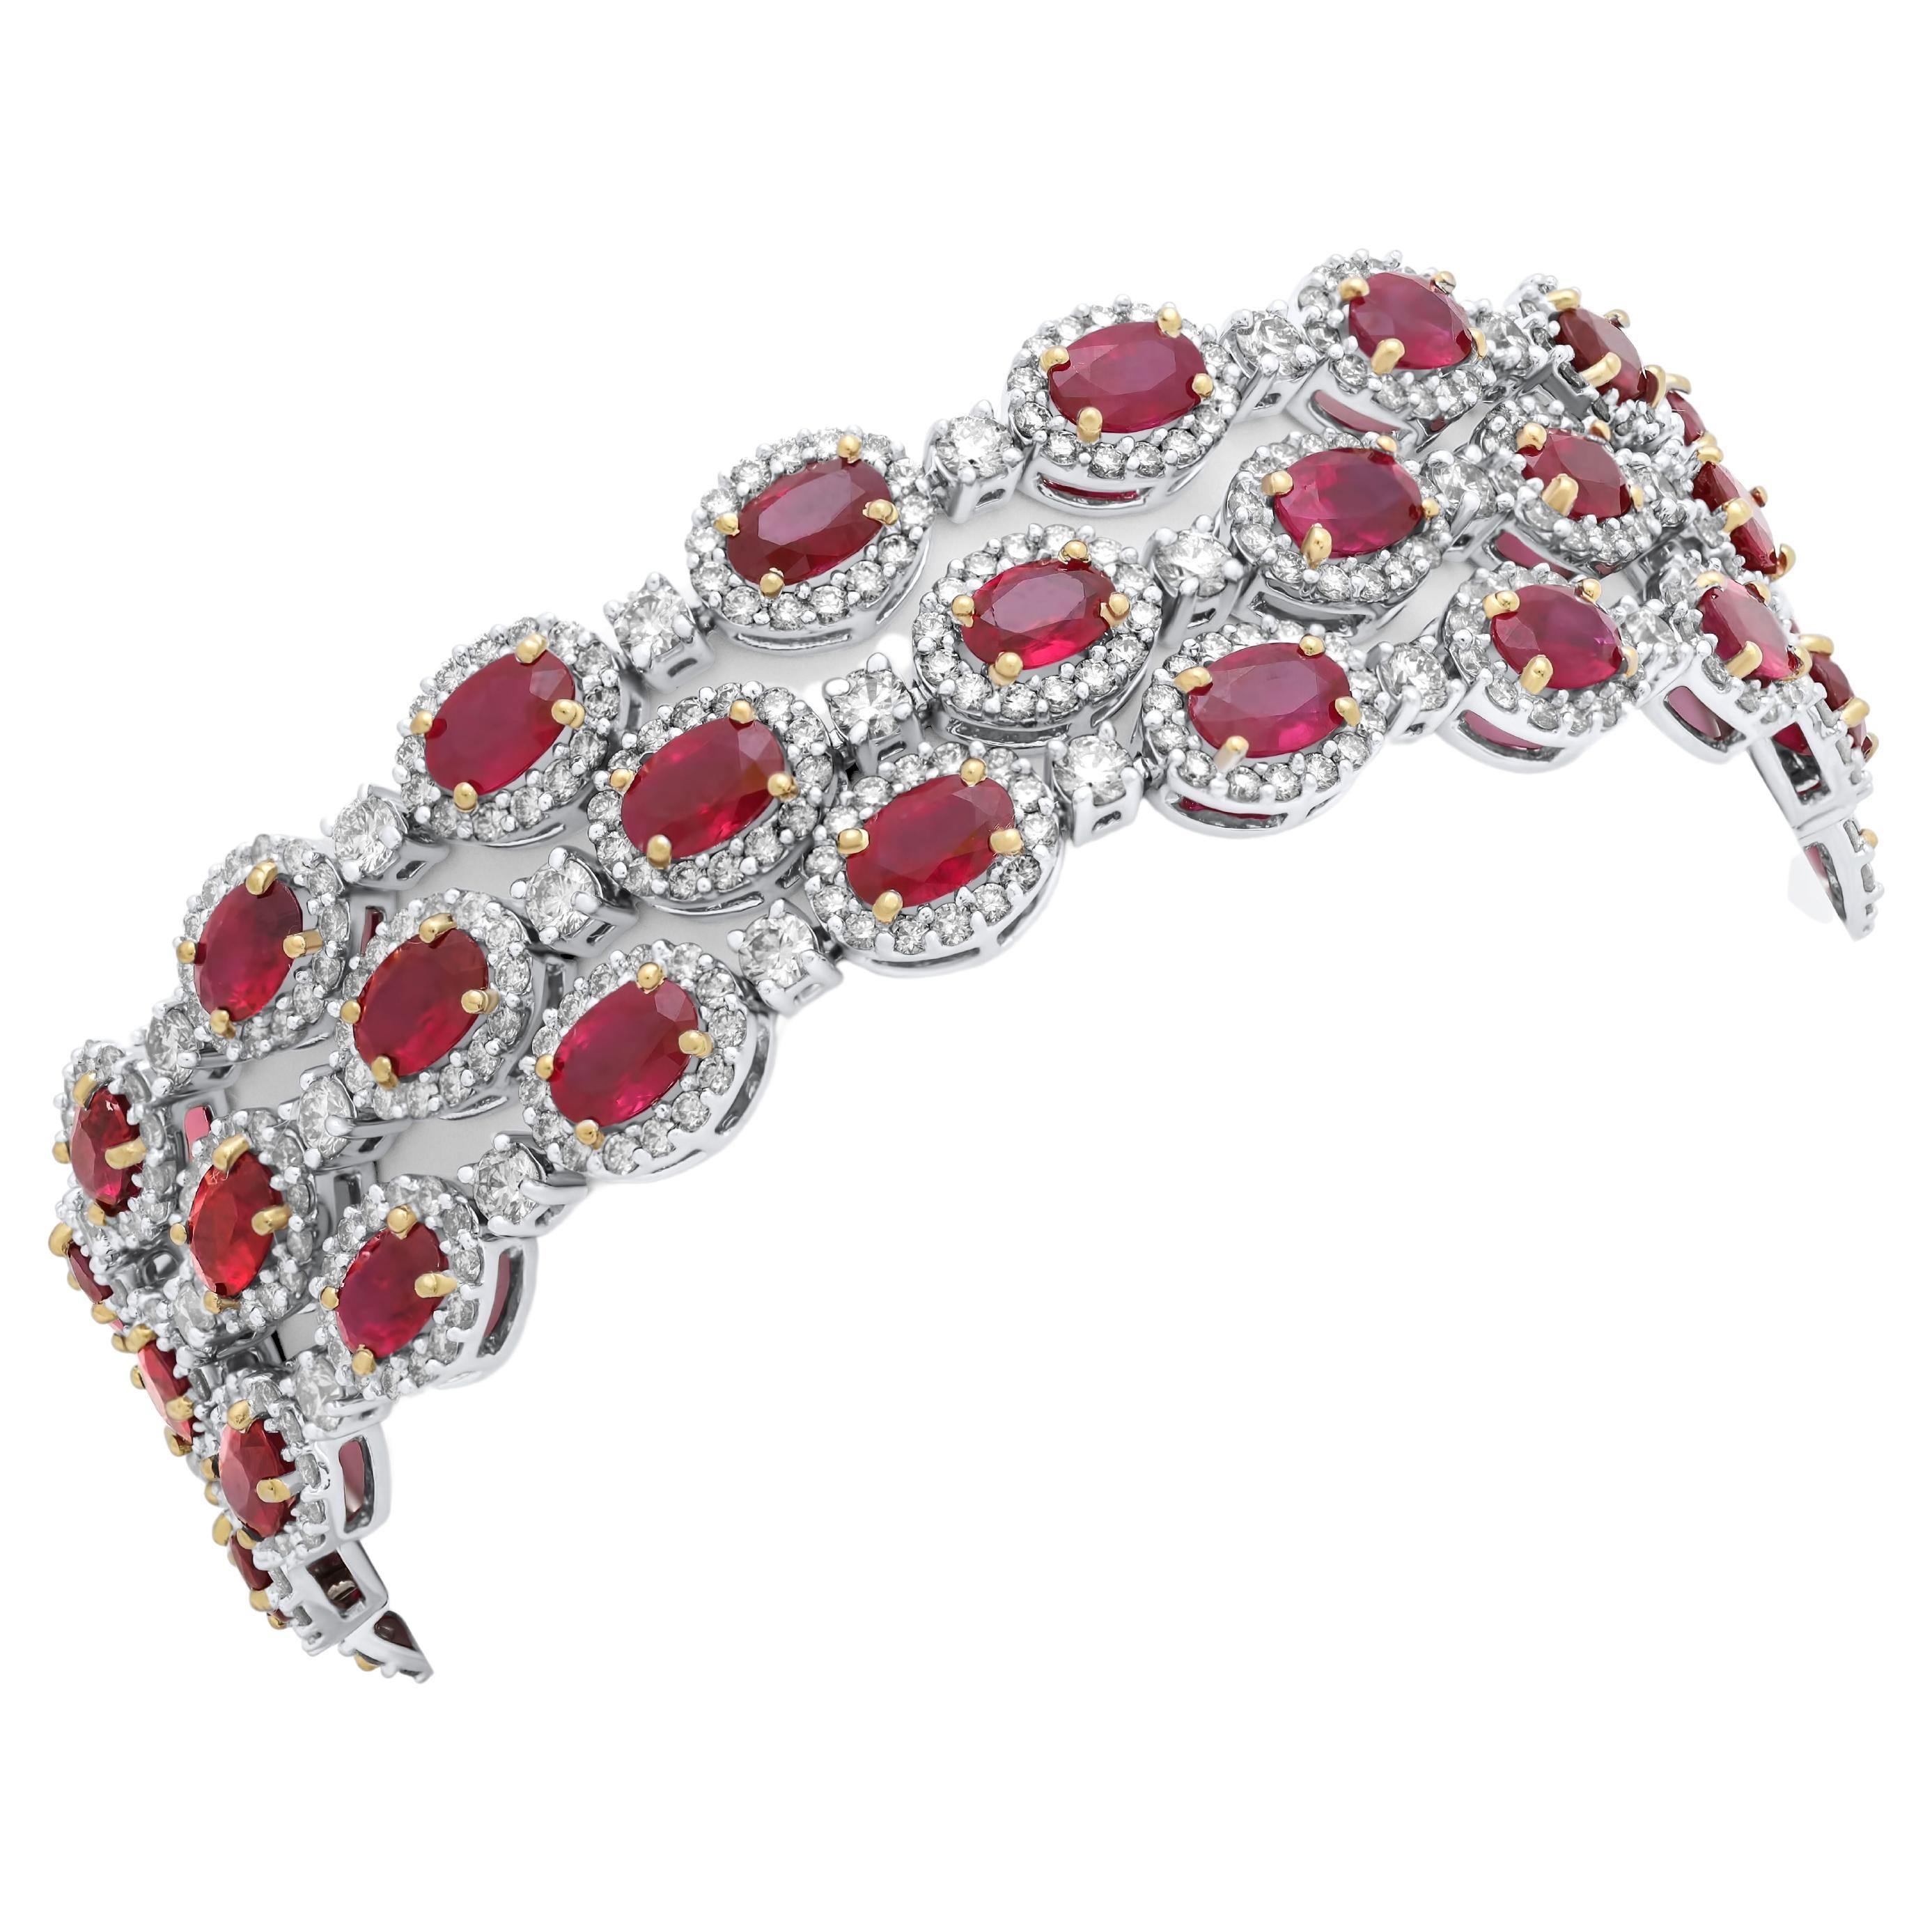 Diana M. 28.00 Carat Ruby and Diamond Bracelet in White Gold